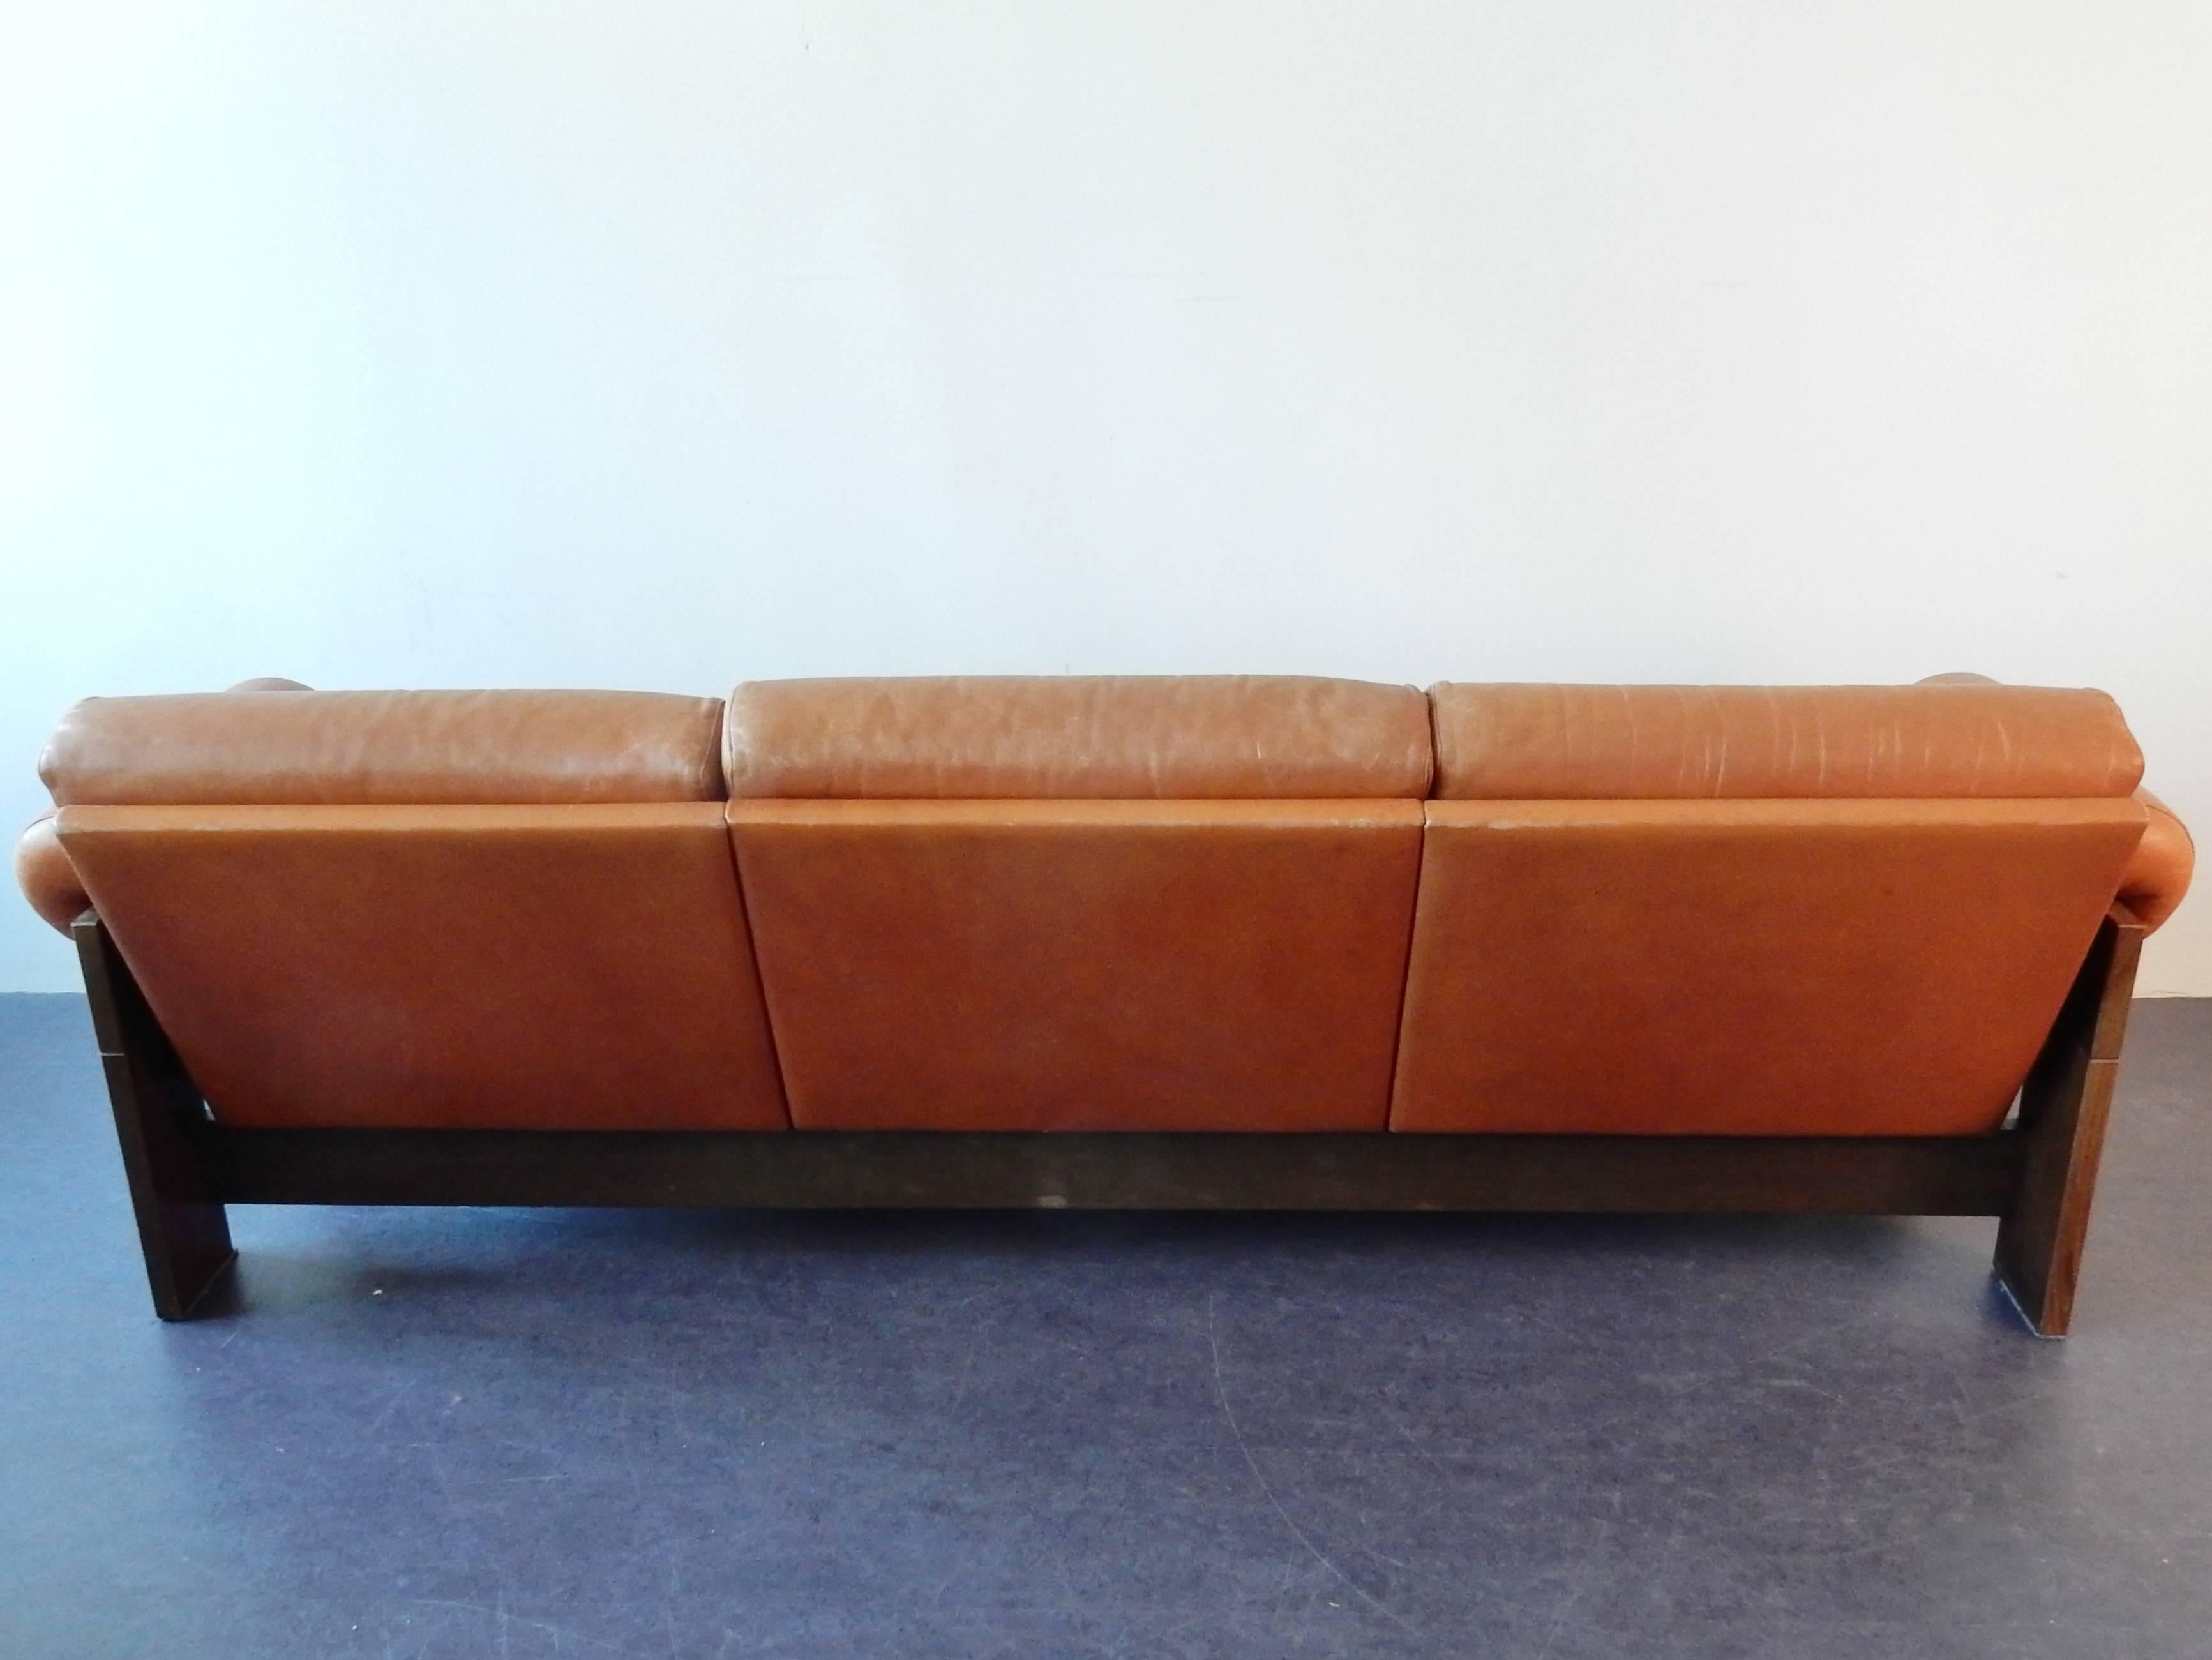 Mid-20th Century Brown Leather Sofa Model 'BZ74' by Martin Visser for T Spectrum, 1960s-1970s